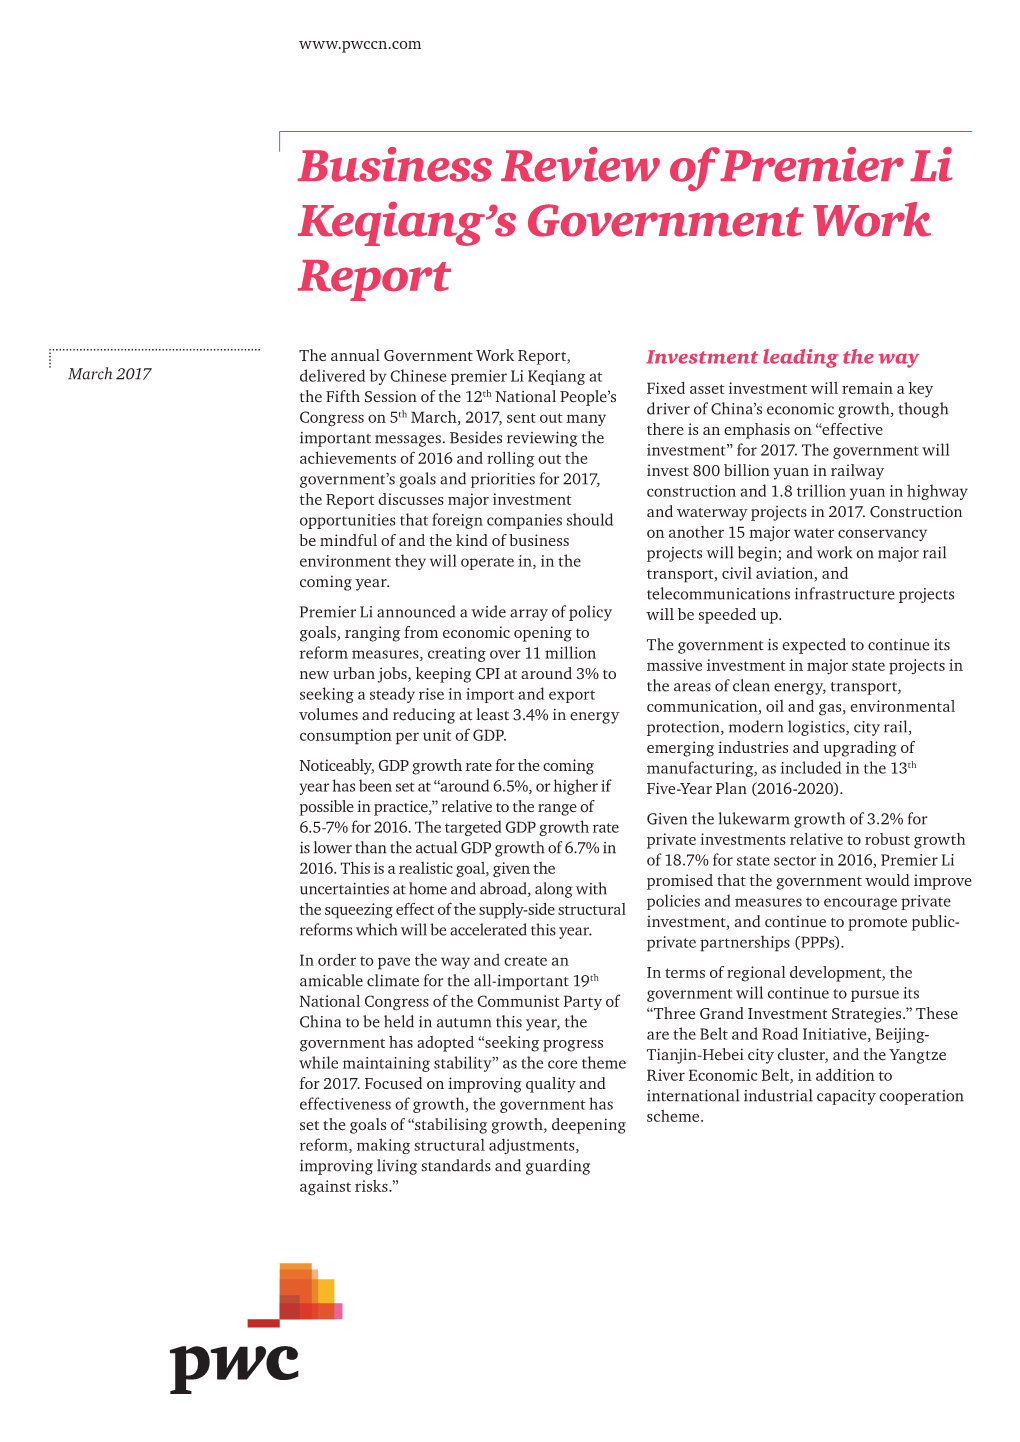 Business Review of Premier Li Keqiang's Government Work Report